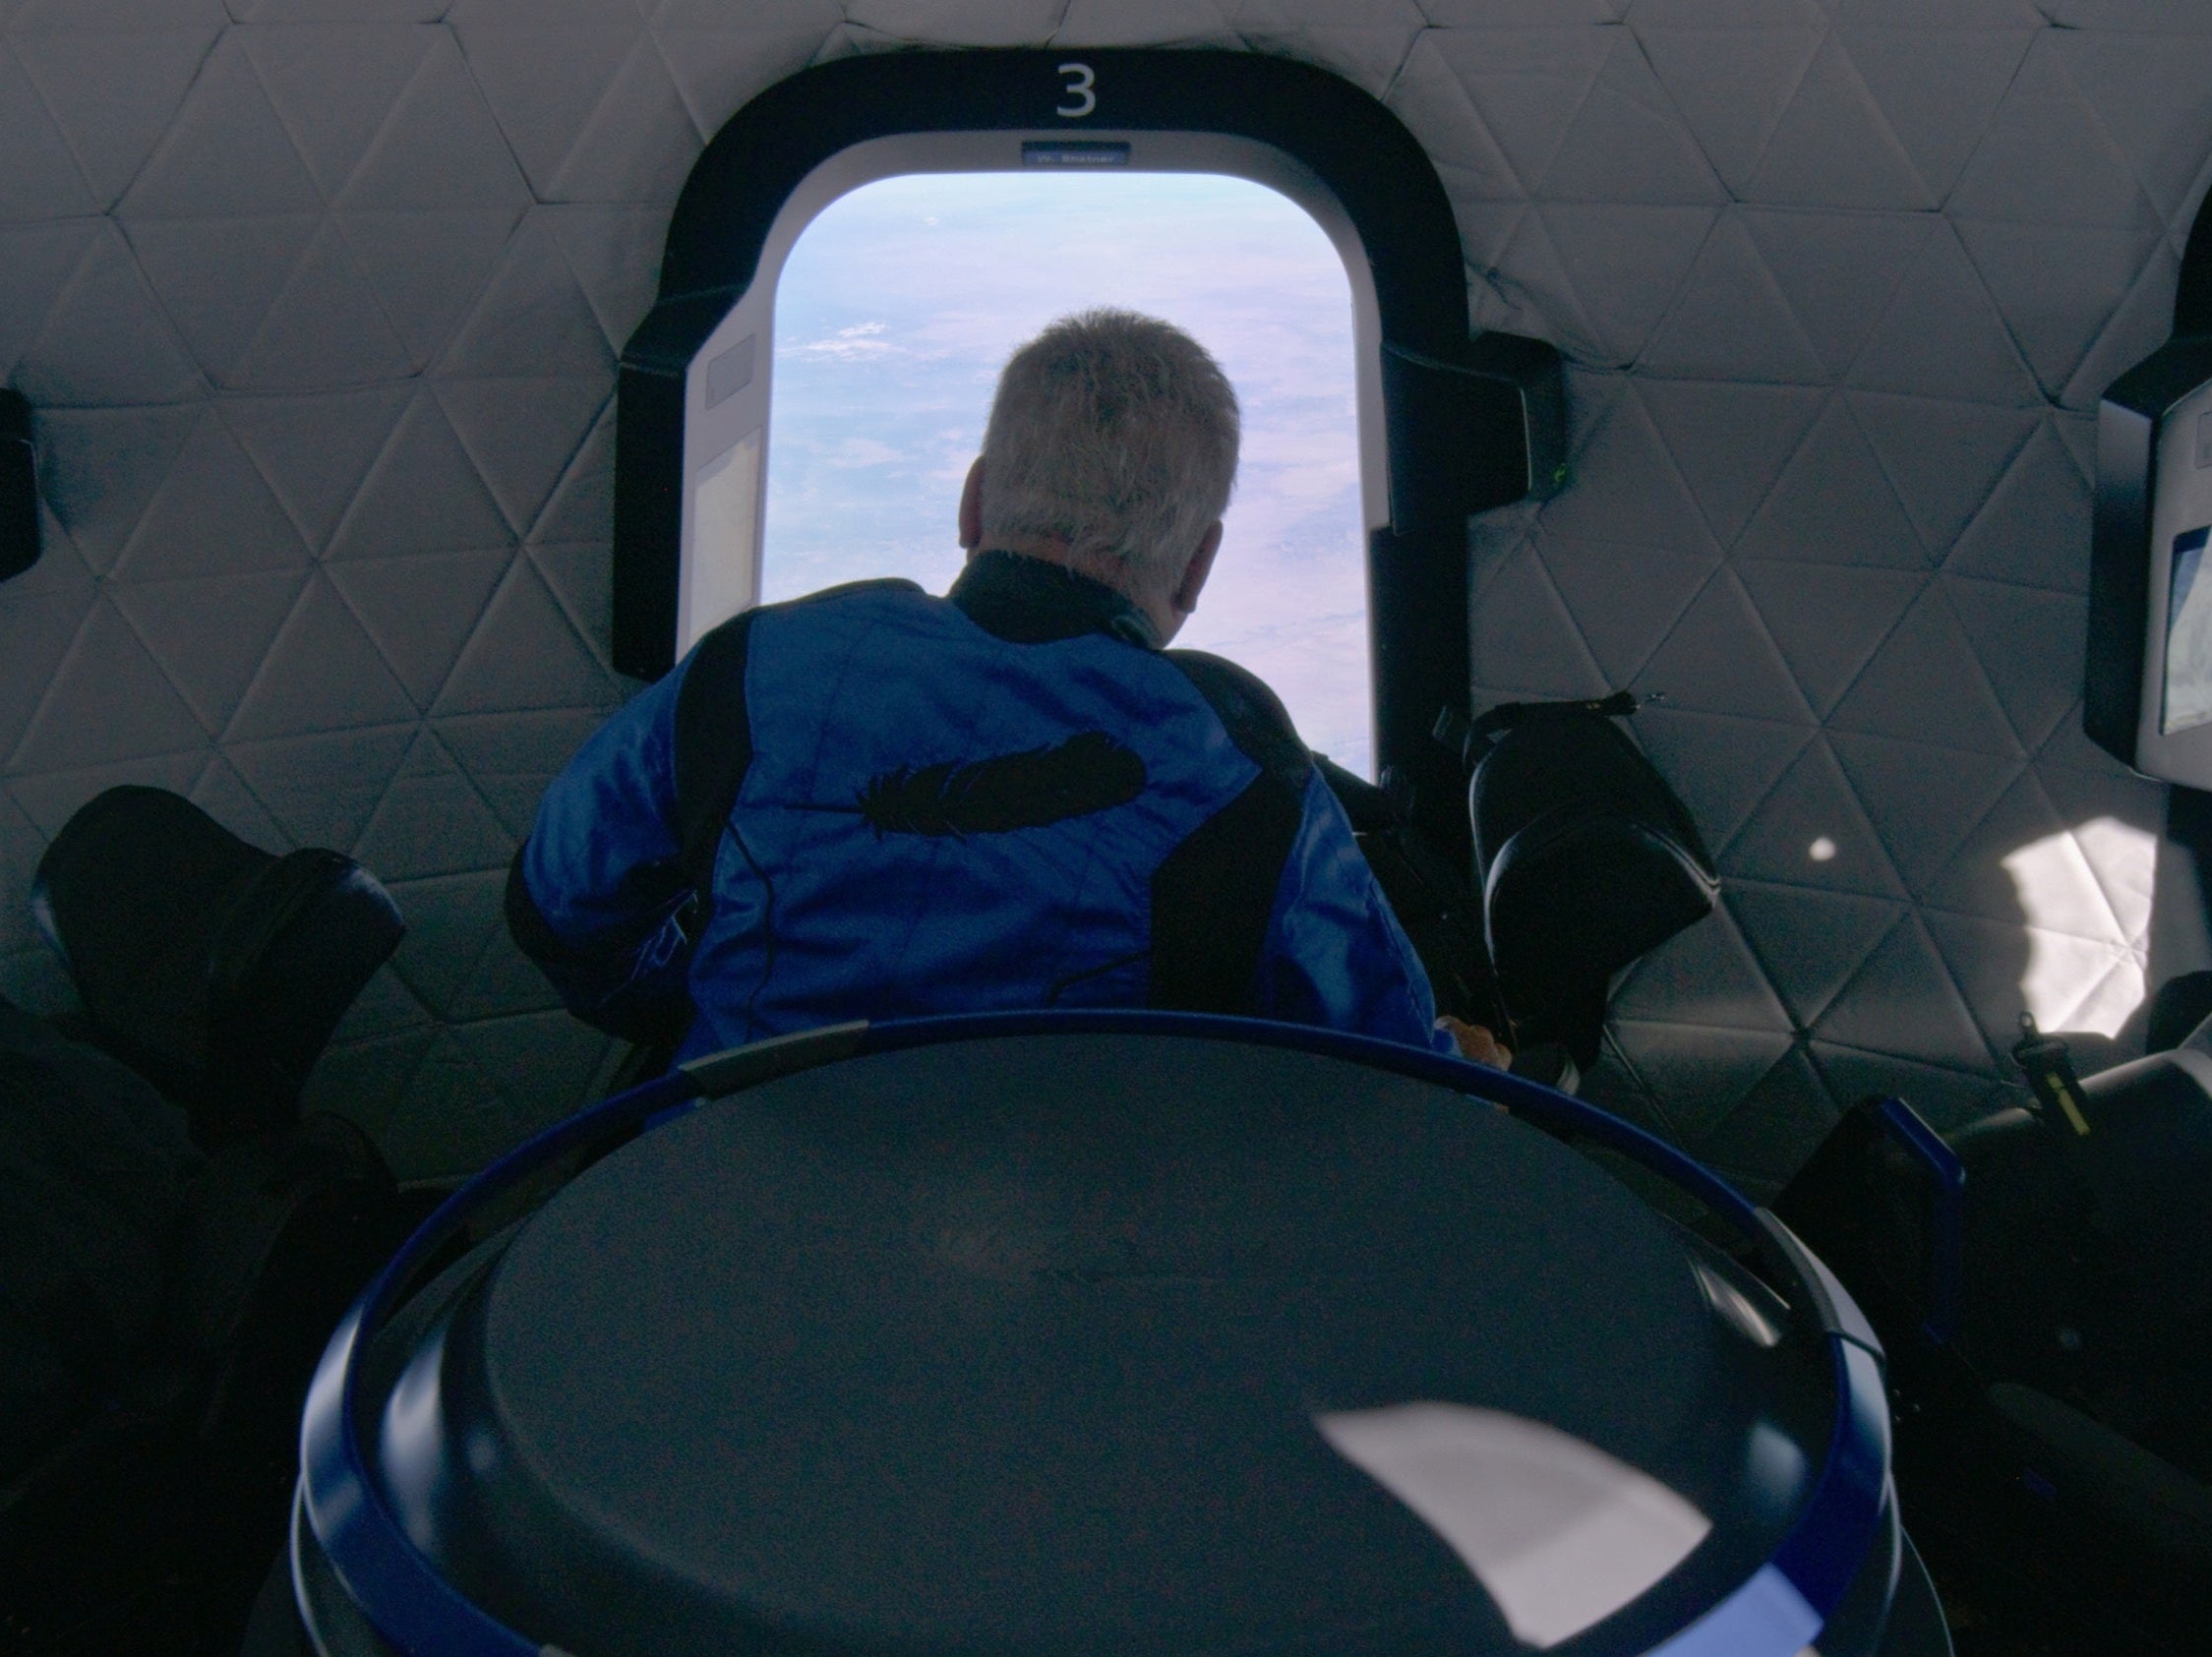 Shatner looks out a window aboard the Blue Origin space vehicle